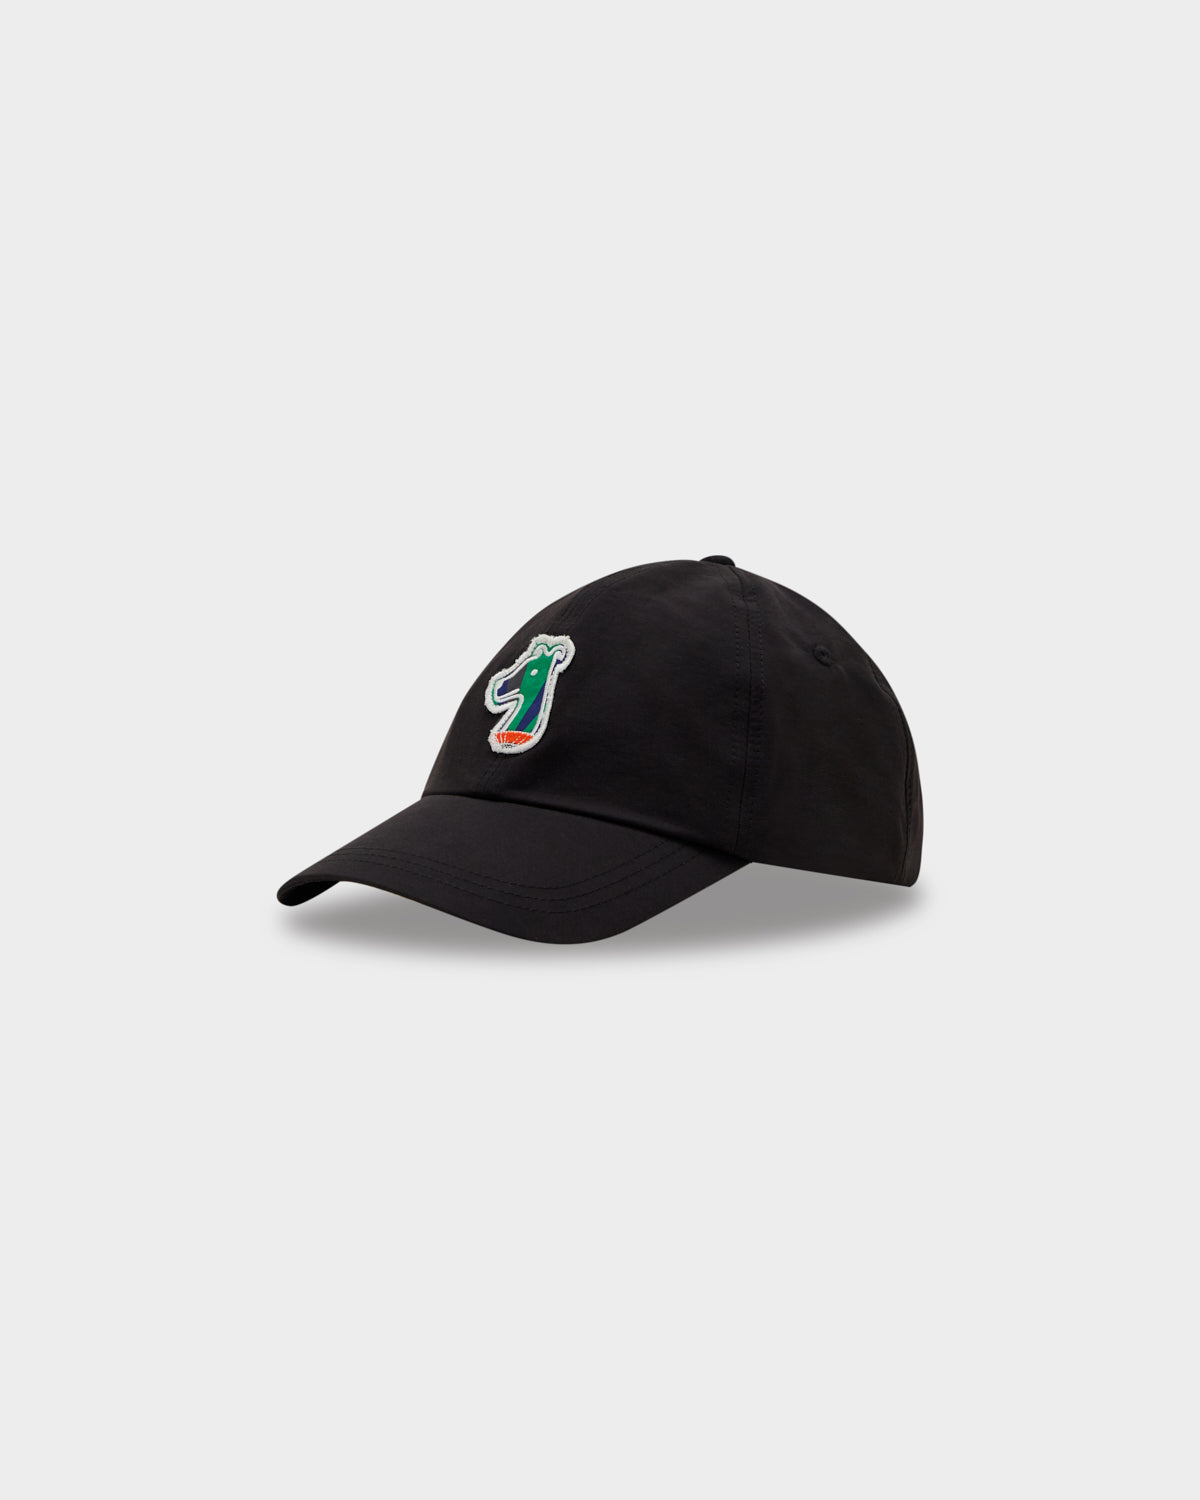 CAP WITH LOGO EMBROIDERED